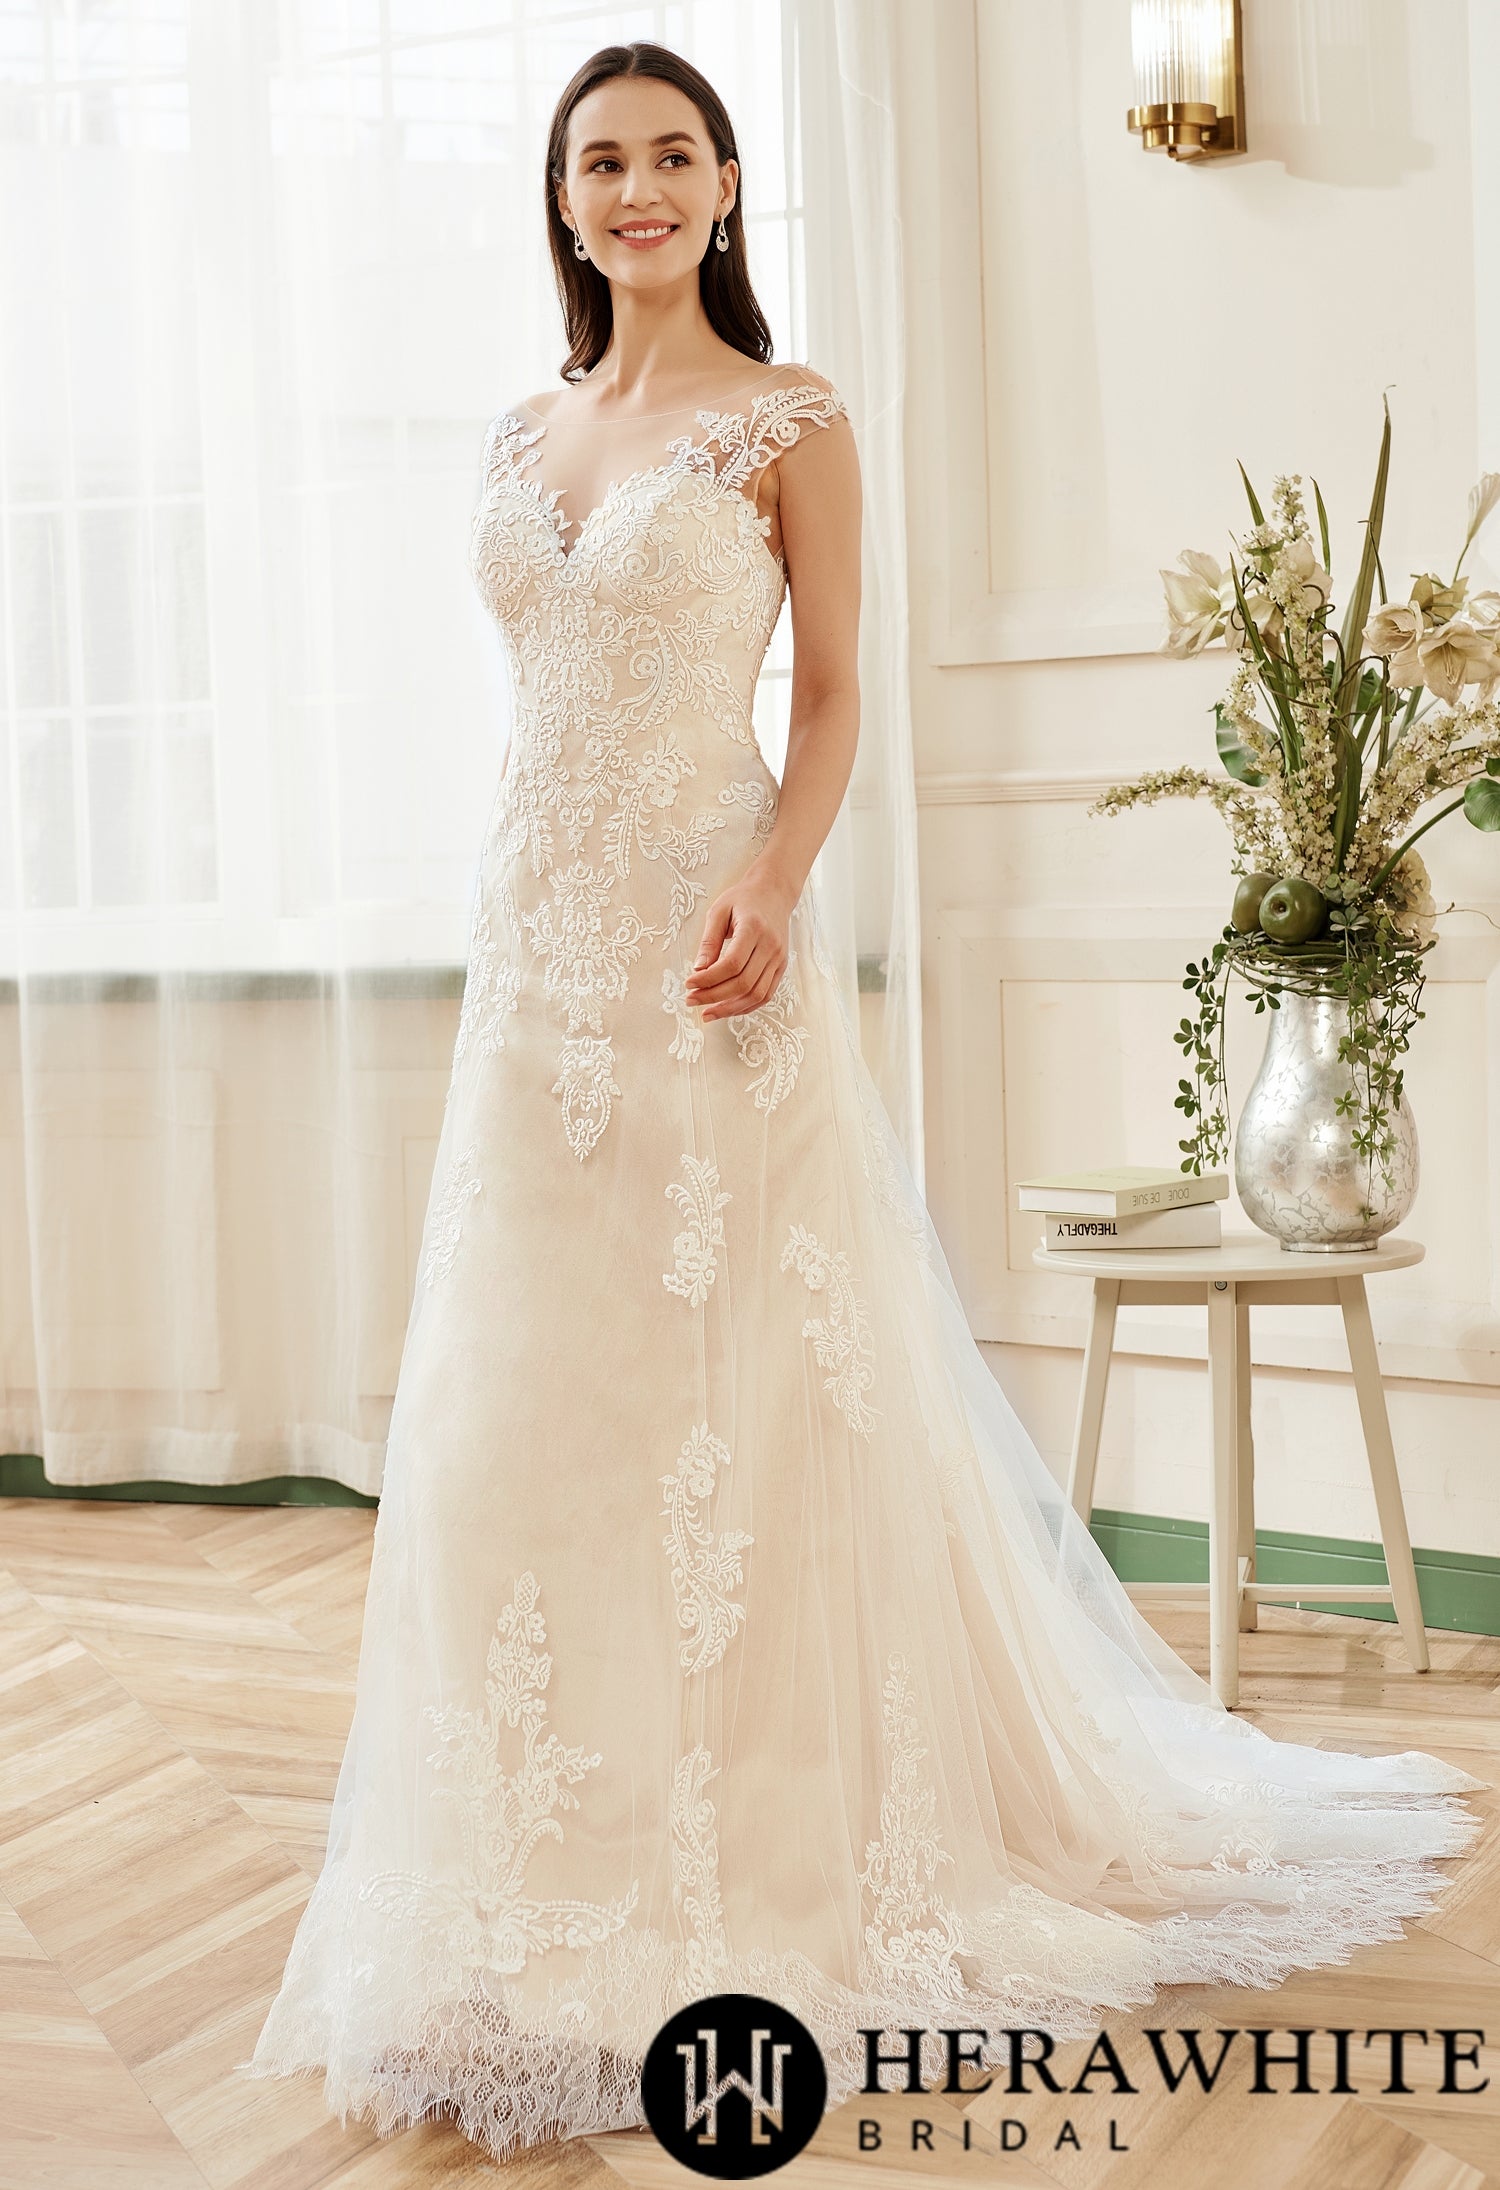 Stunning Illusion Lace Bateau Neckline With Cap Sleeve Wedding Gown